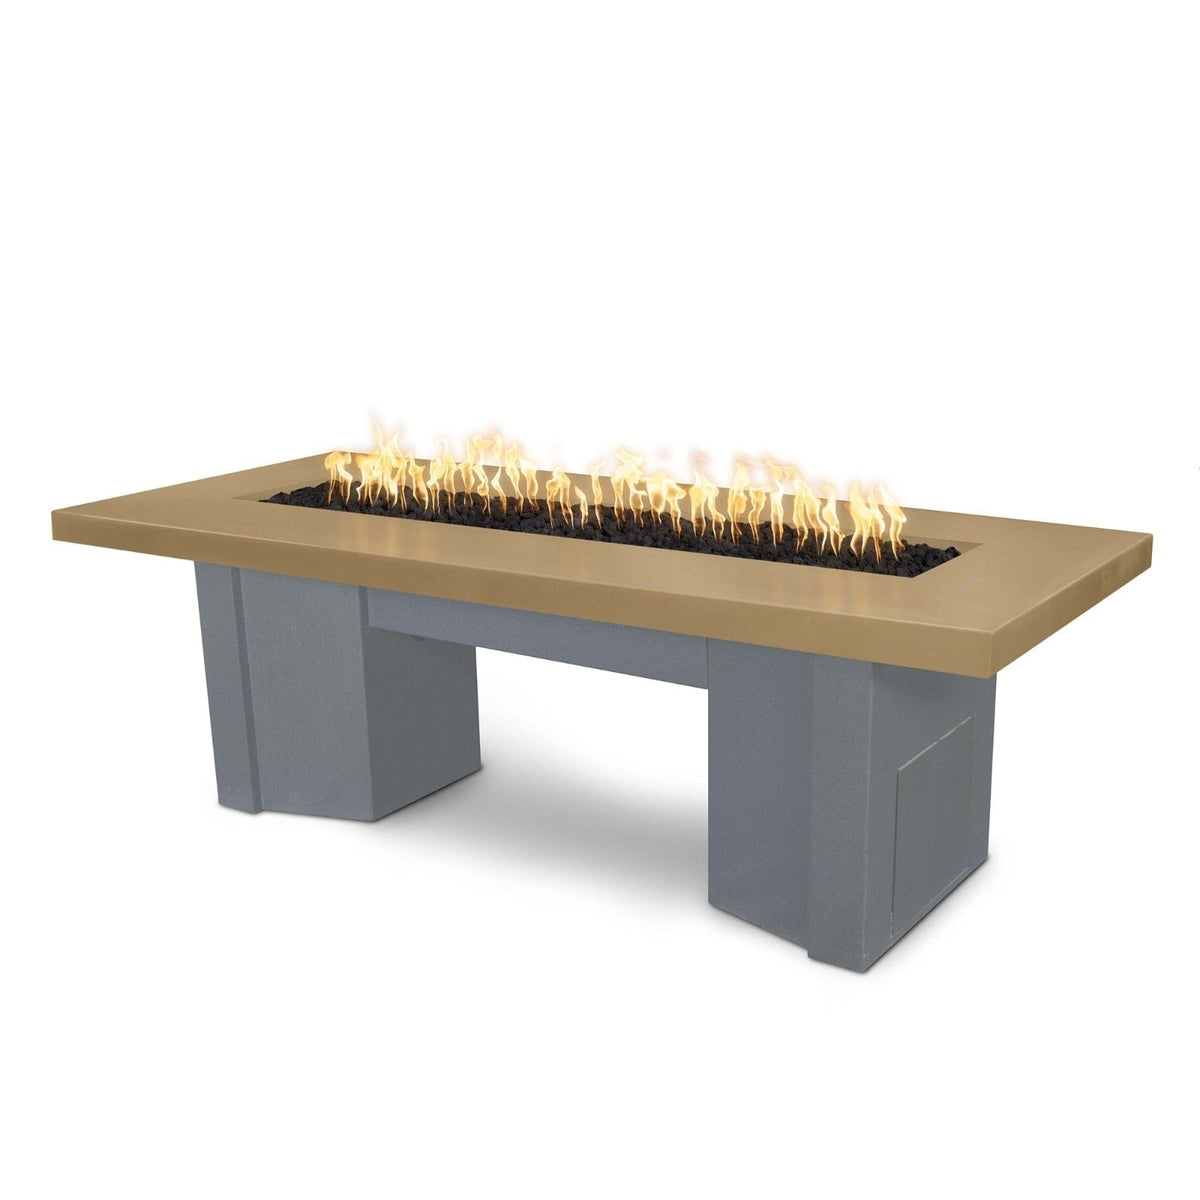 The Outdoor Plus Fire Features Brown (-BRN) / Gray Powder Coated Steel (-GRY) The Outdoor Plus 78&quot; Alameda Fire Table Smooth Concrete in Liquid Propane - 110V Plug &amp; Play Electronic Ignition / OPT-ALMGFRC78EKIT-LP